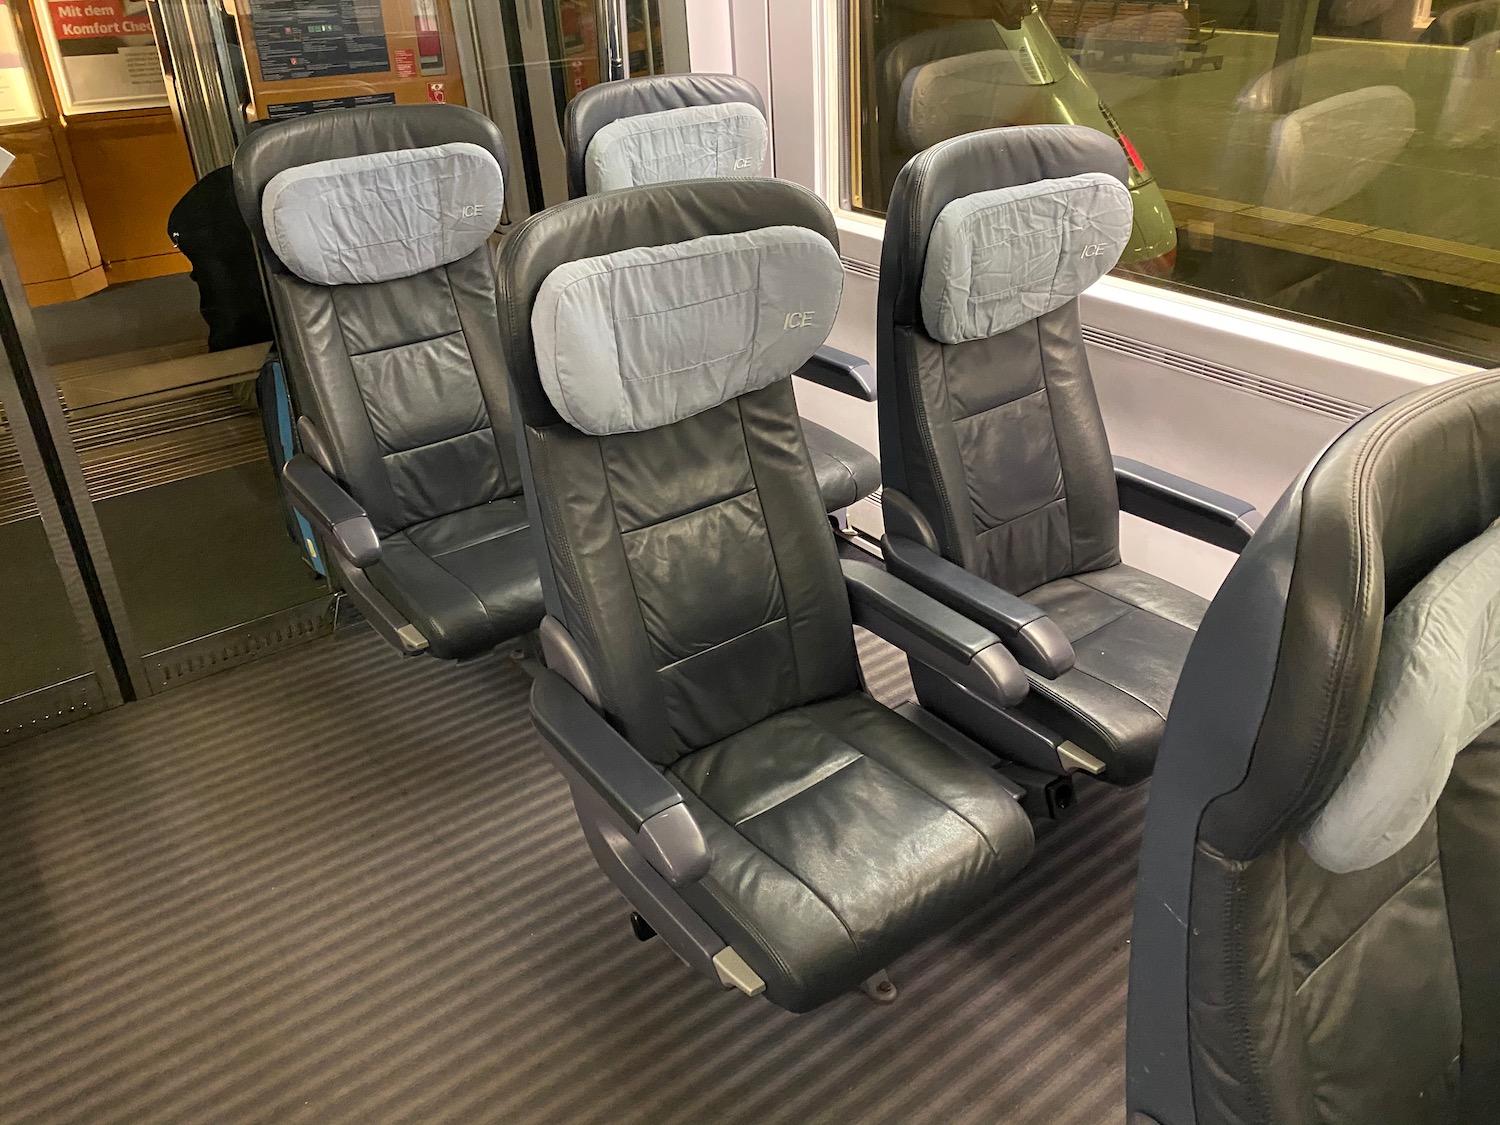 a group of black chairs in a train